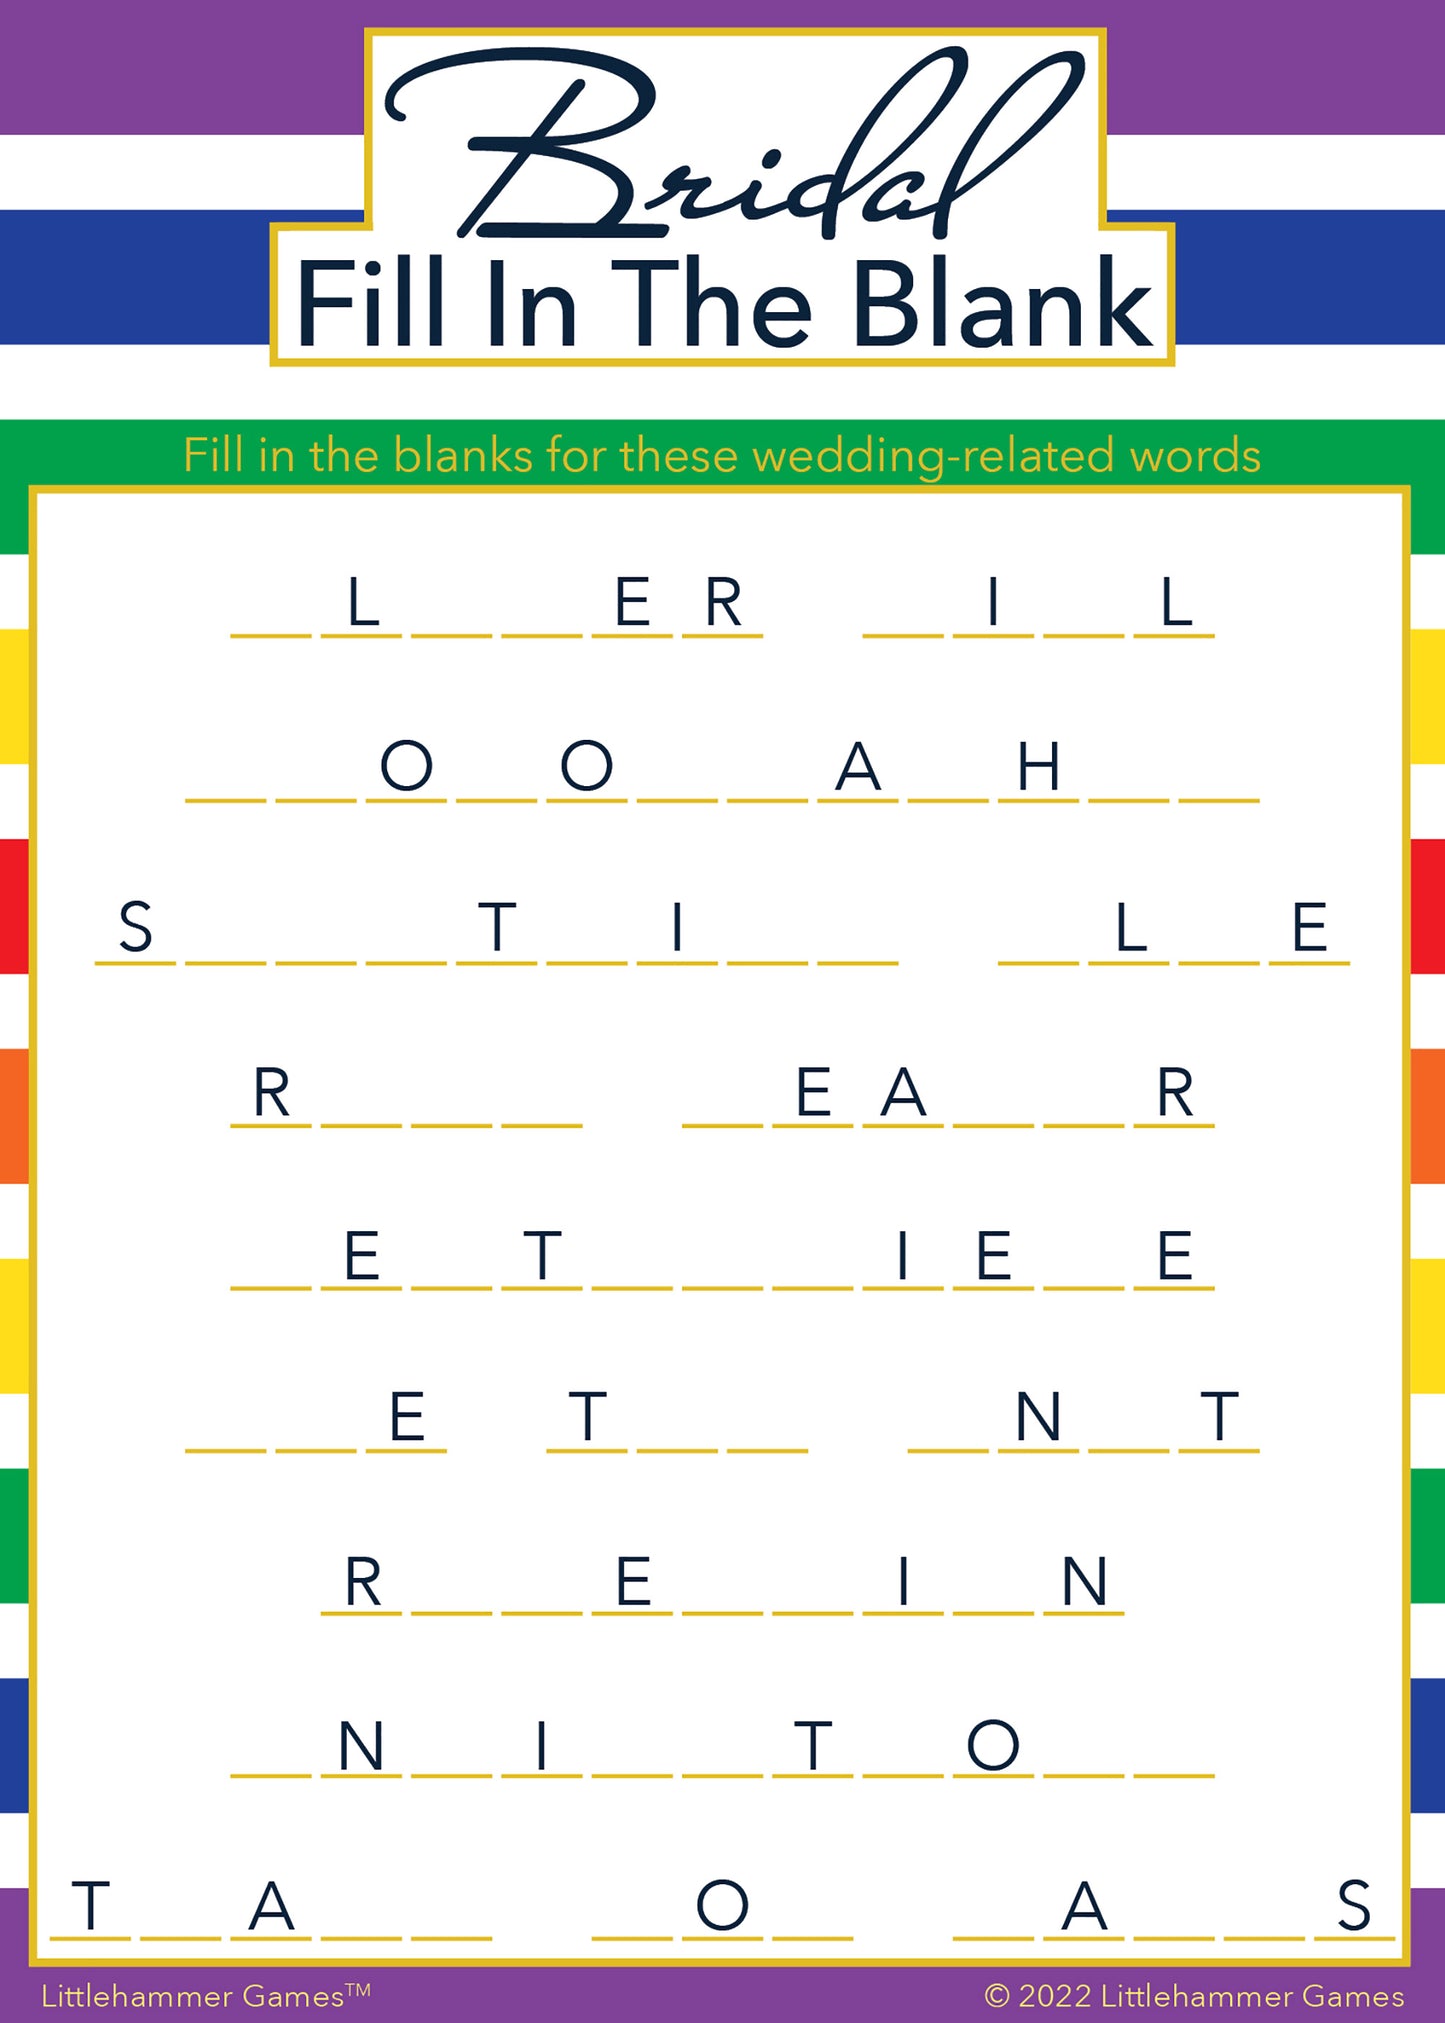 Bridal Fill in the Blank game card with a rainbow-striped background